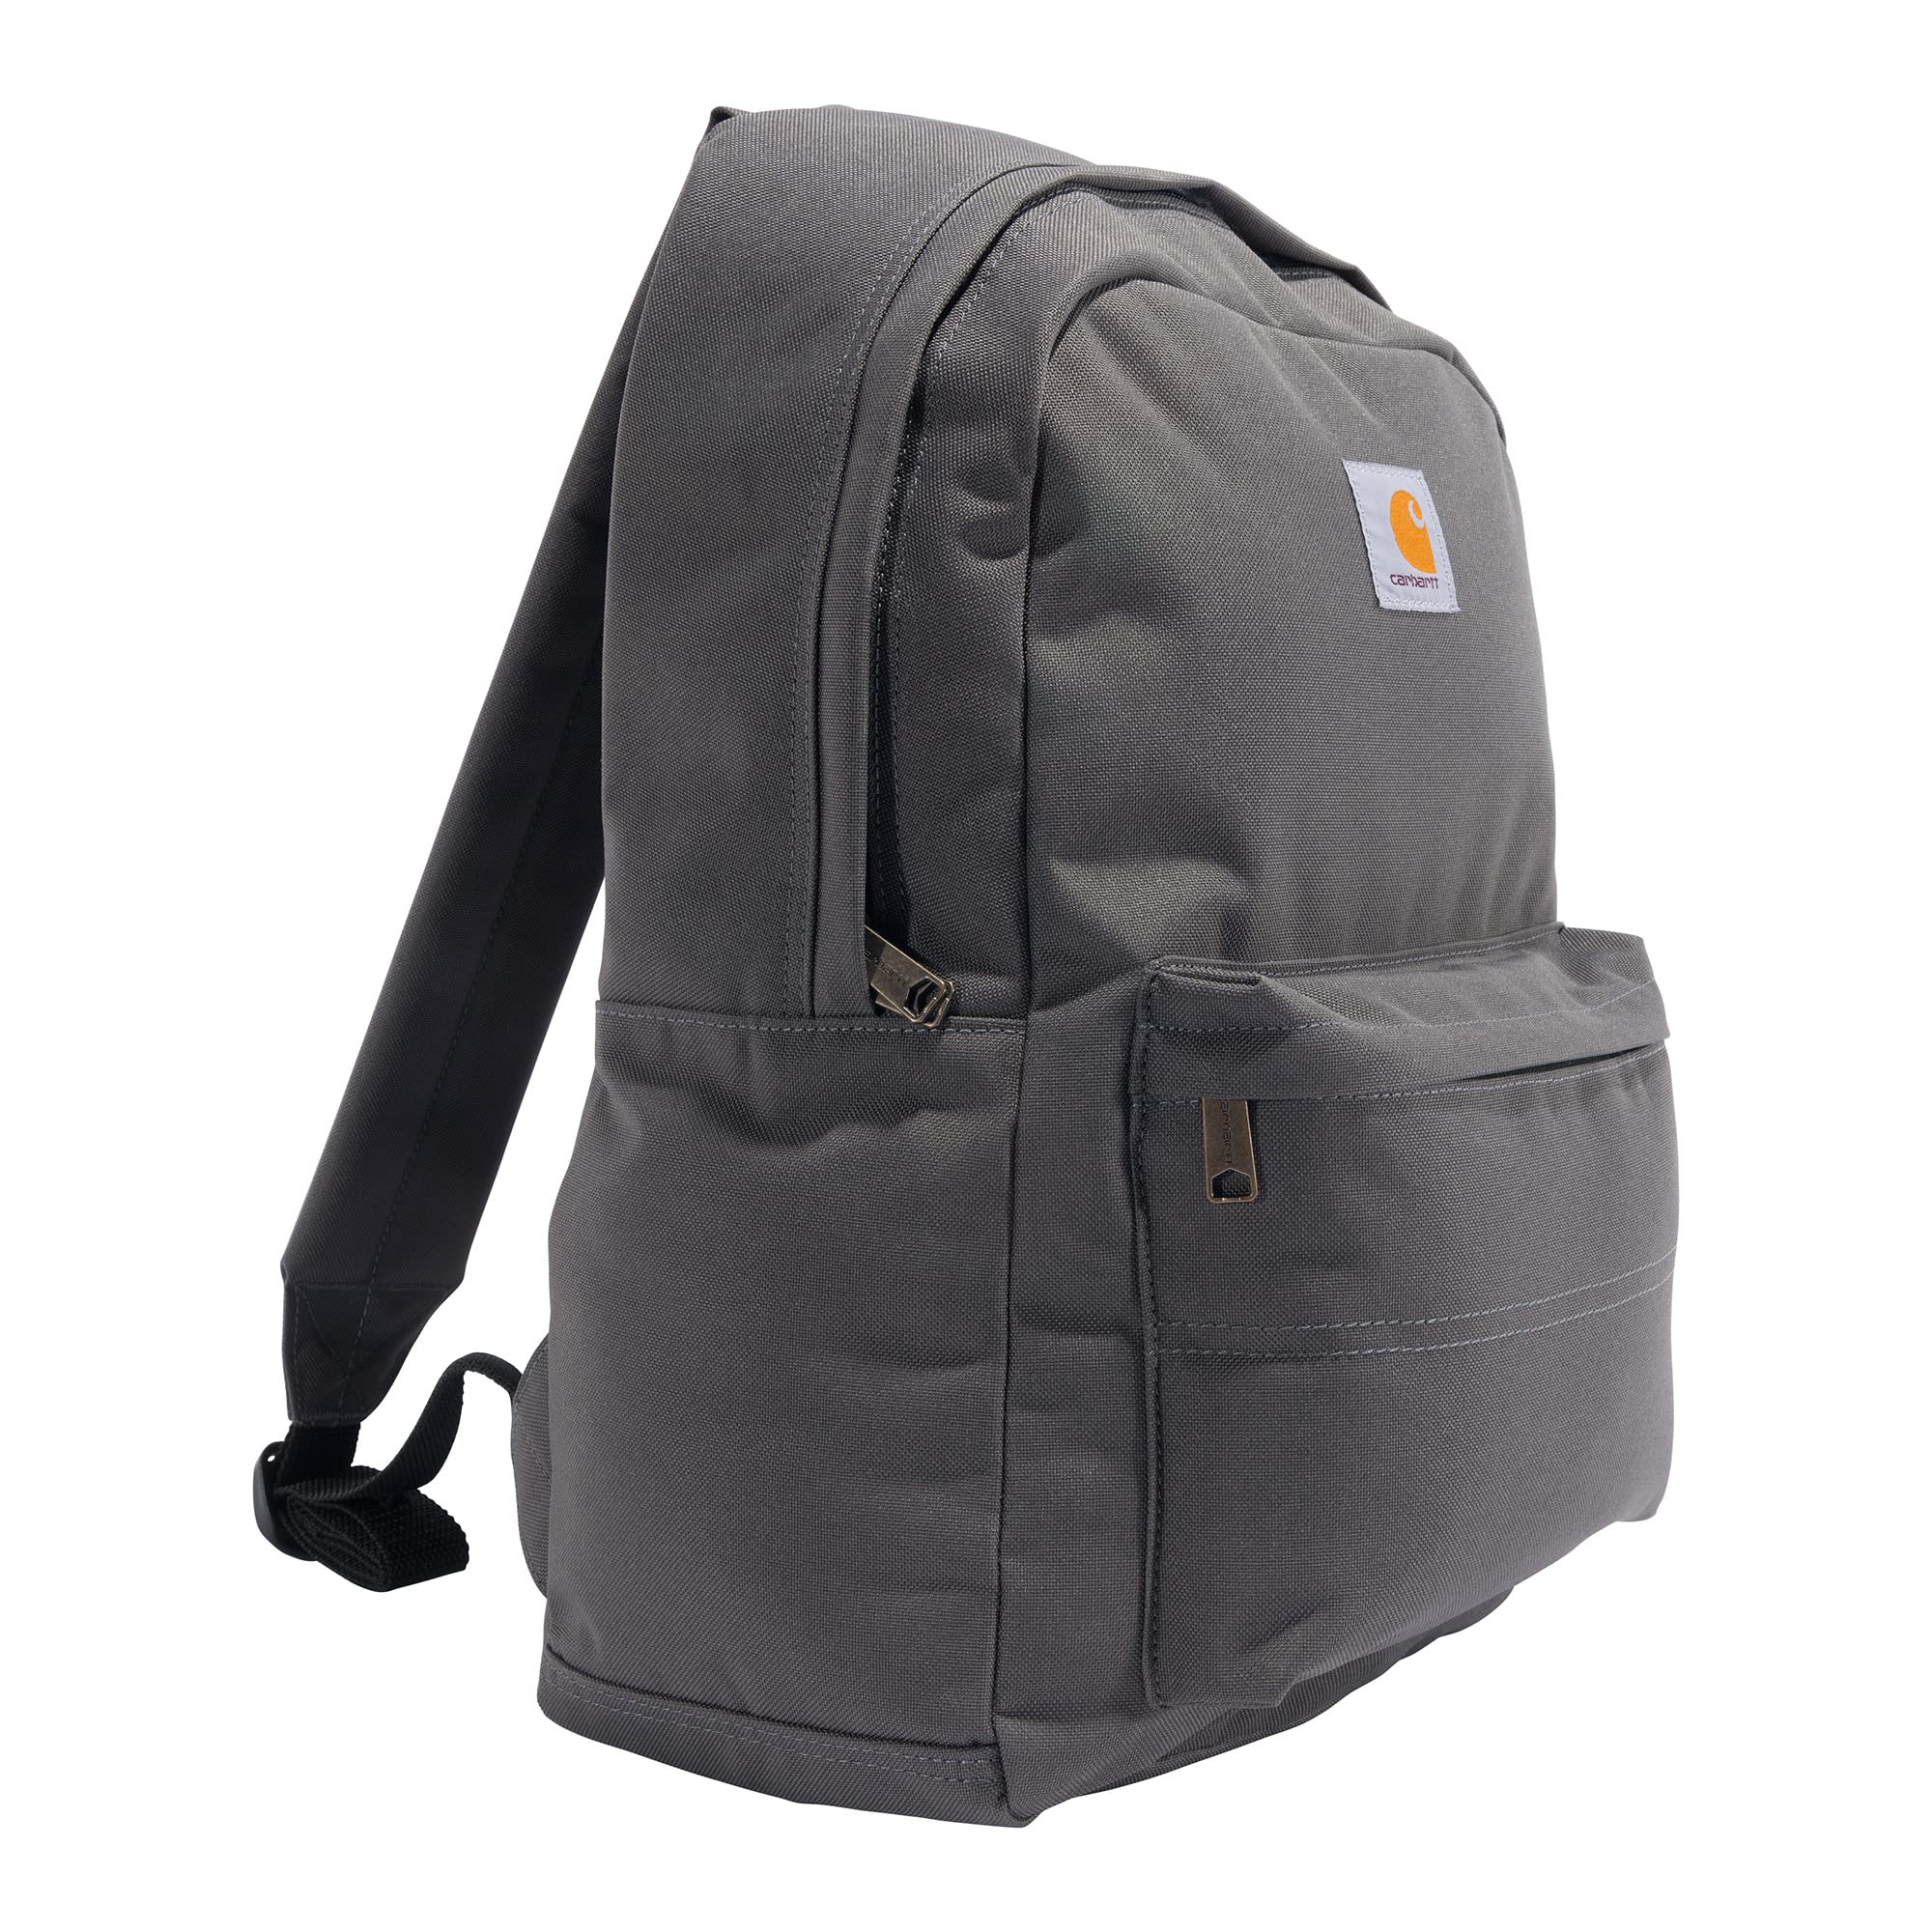 Carhartt 21L Classic Laptop Daypack, Durable Water-Resistant Pack with Laptop Sleeve, Gray